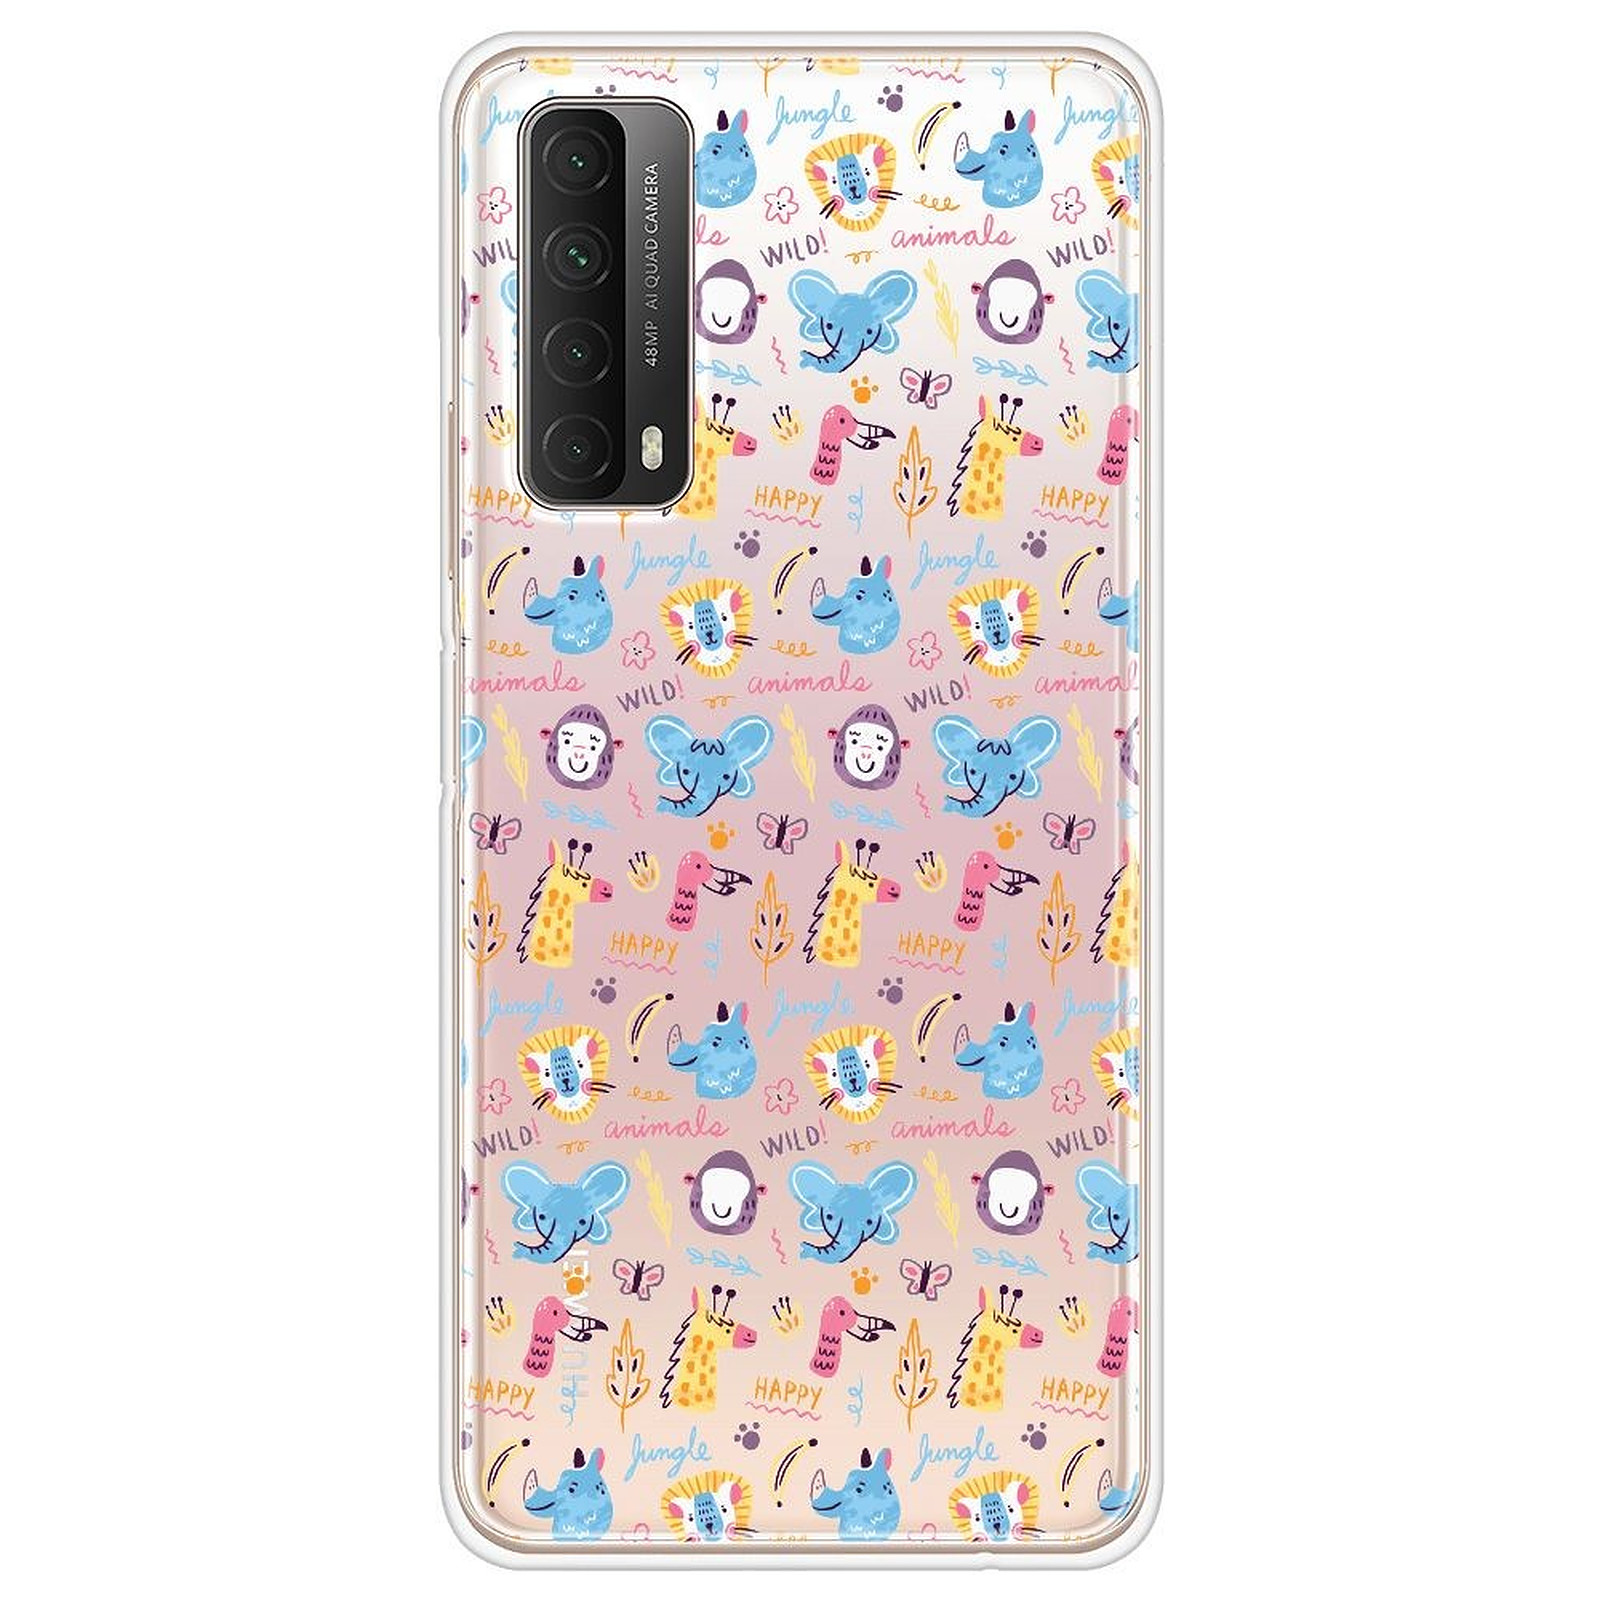 1001 Coques Coque silicone gel Huawei P Smart 2021 motif Happy animals - Coque telephone 1001Coques